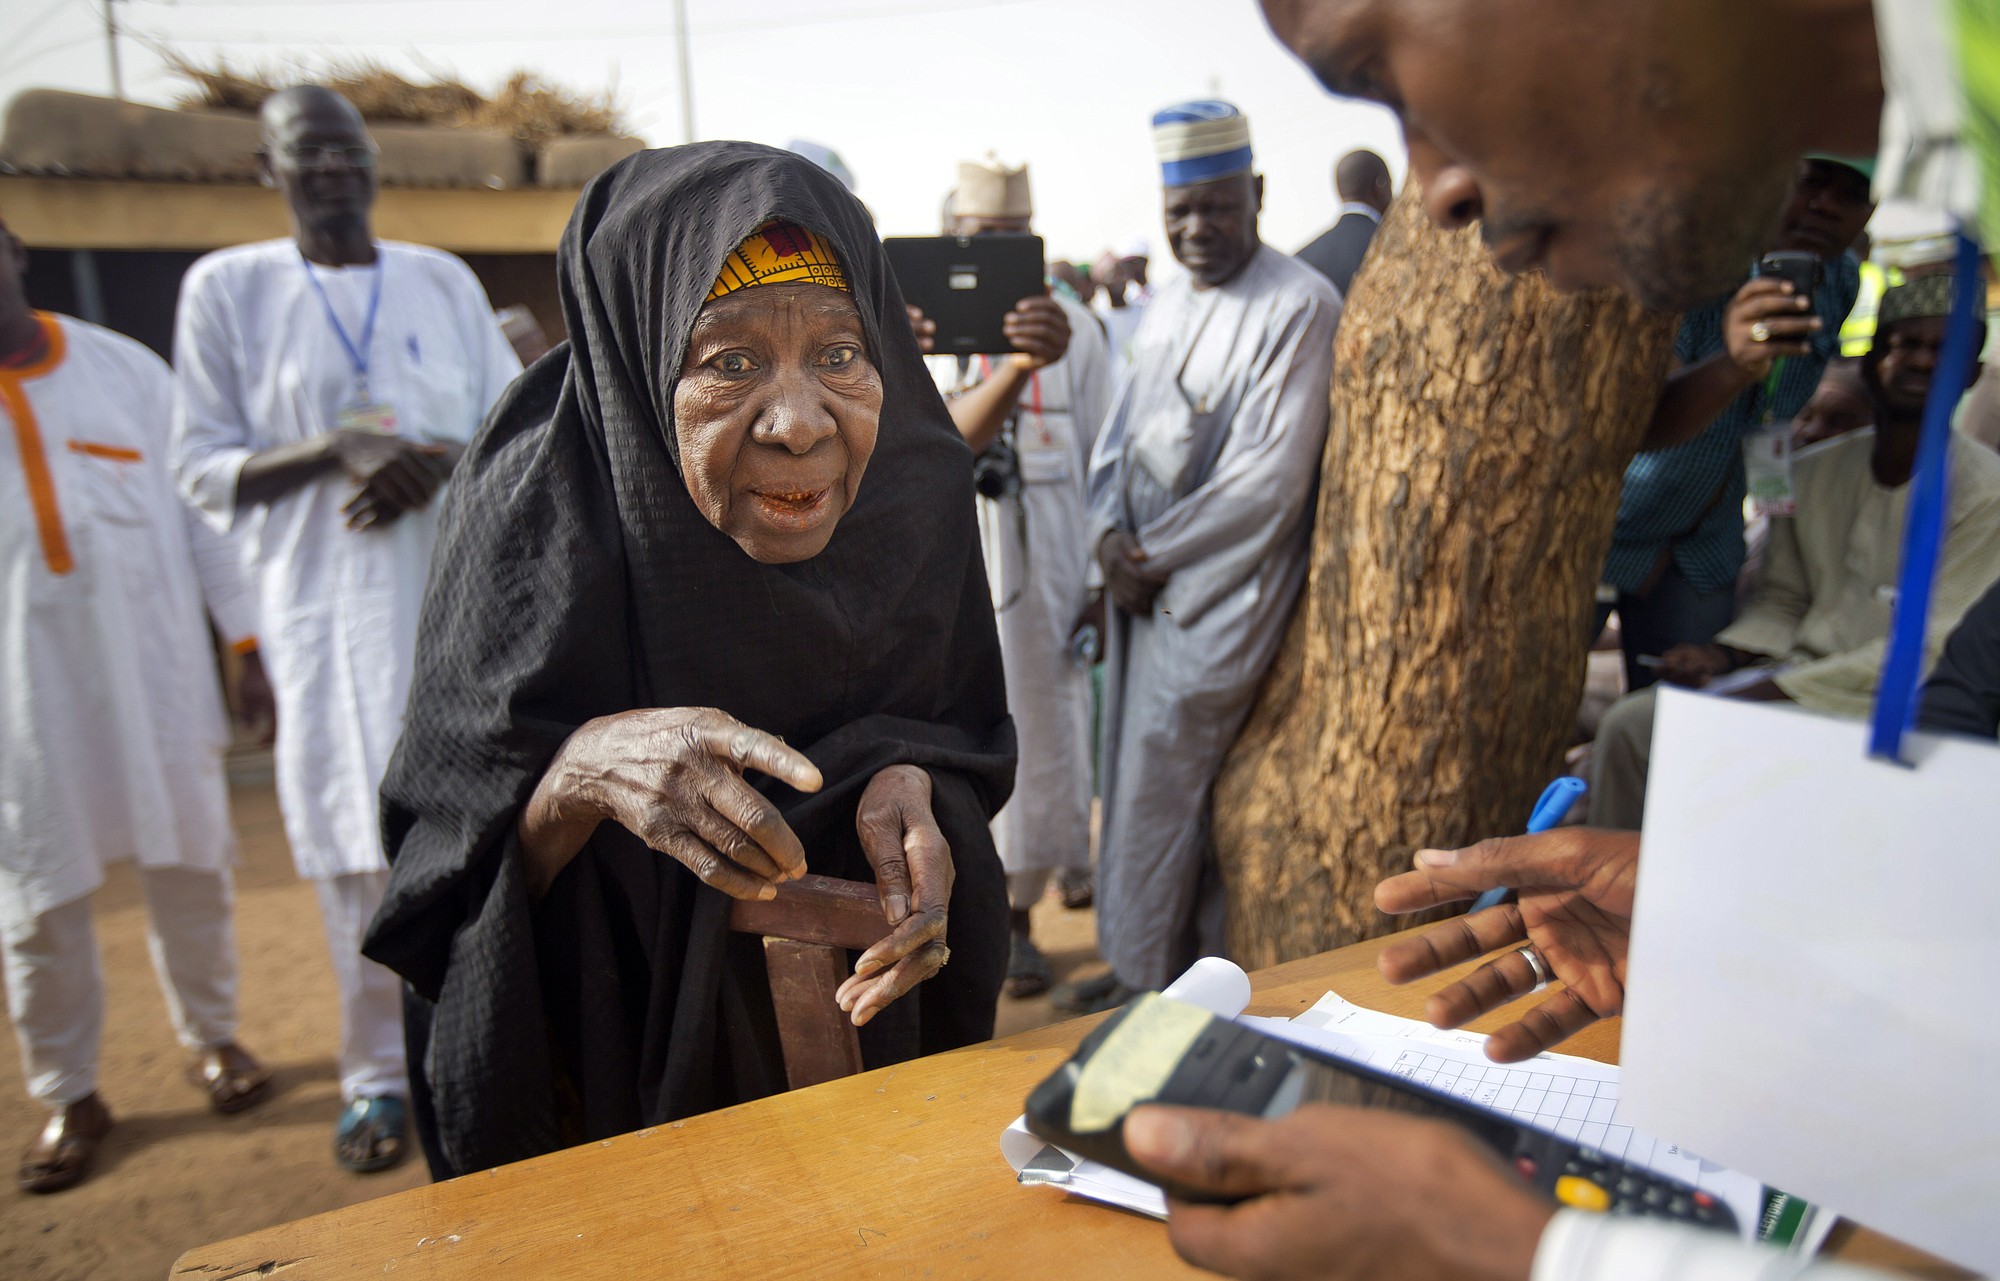 A woman presents her fingerprint to validate her voting card Saturday in Daura, Nigeria, prior to casting her vote in the presidential election.